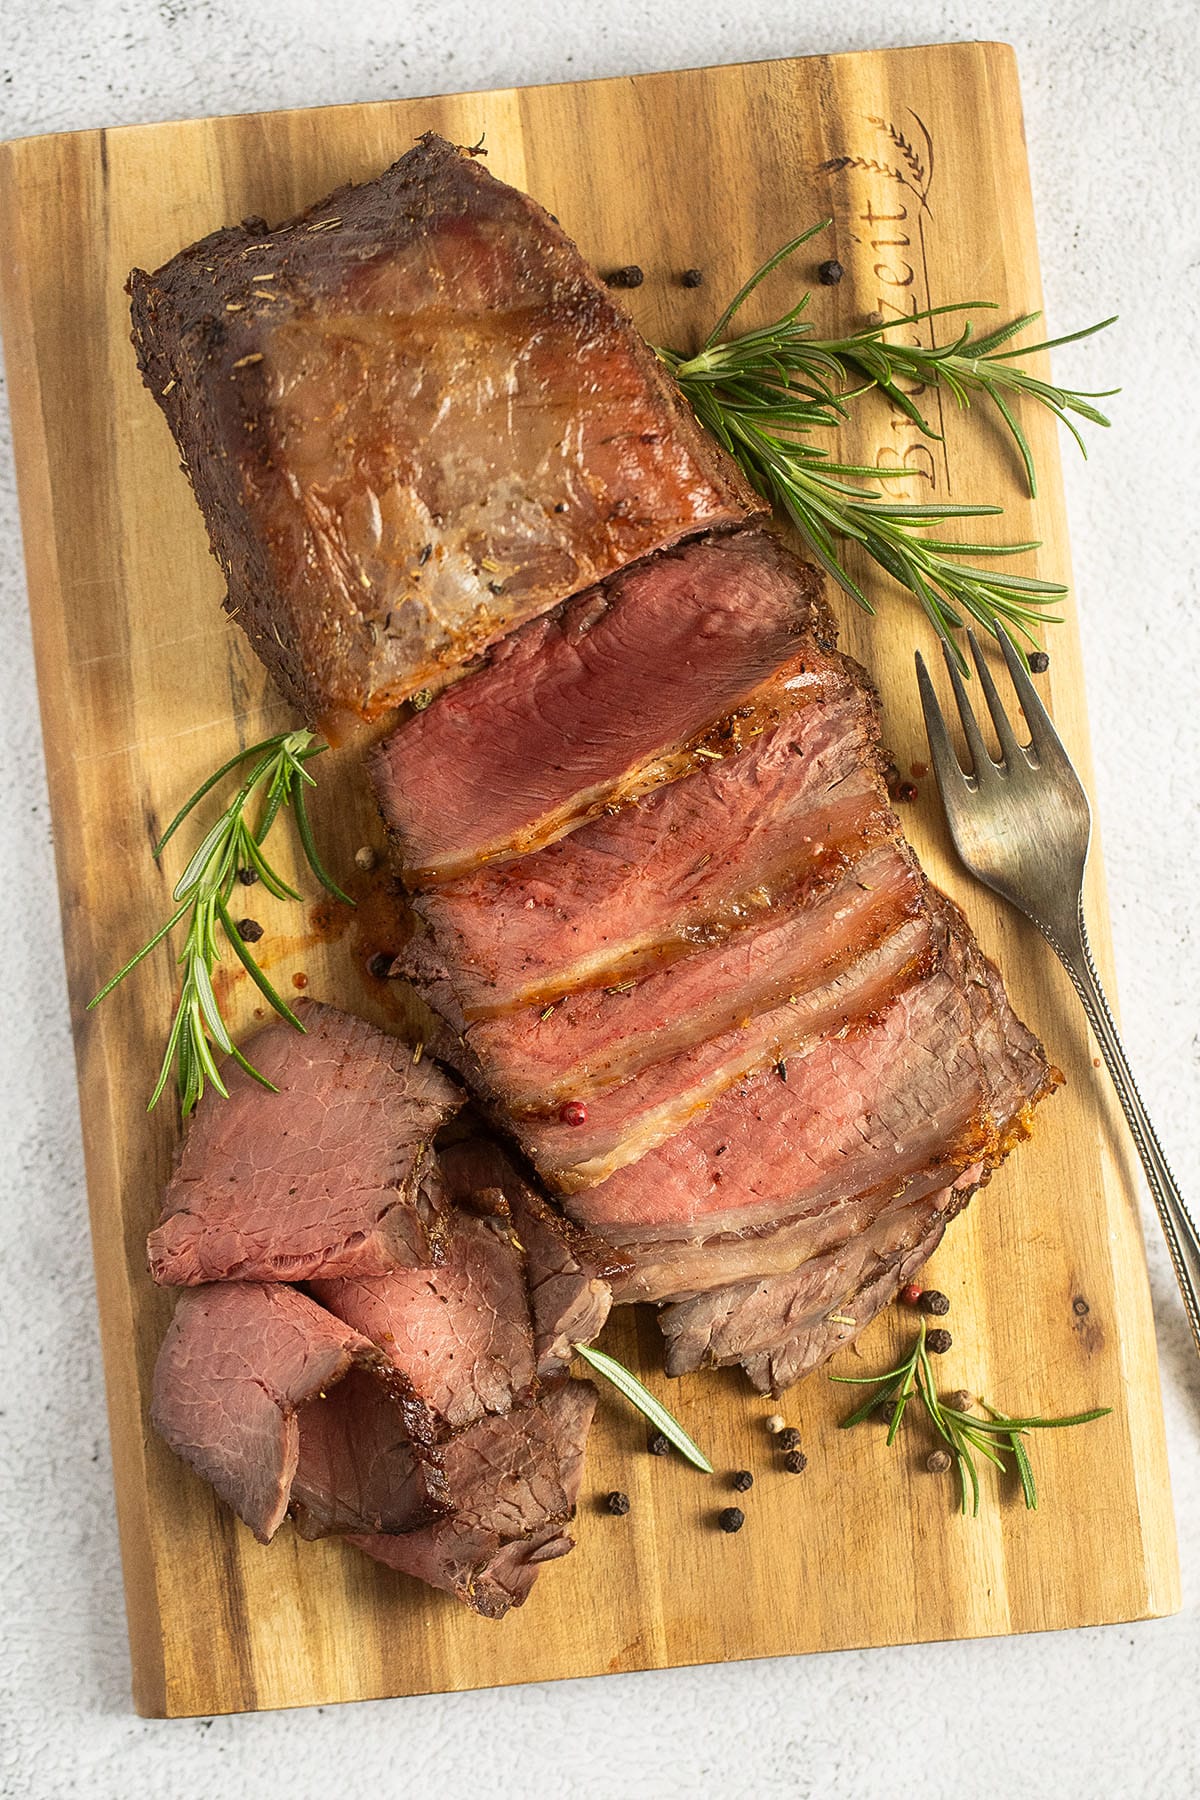 cold sliced beef on a cutting board with rosemary sprigs around it.